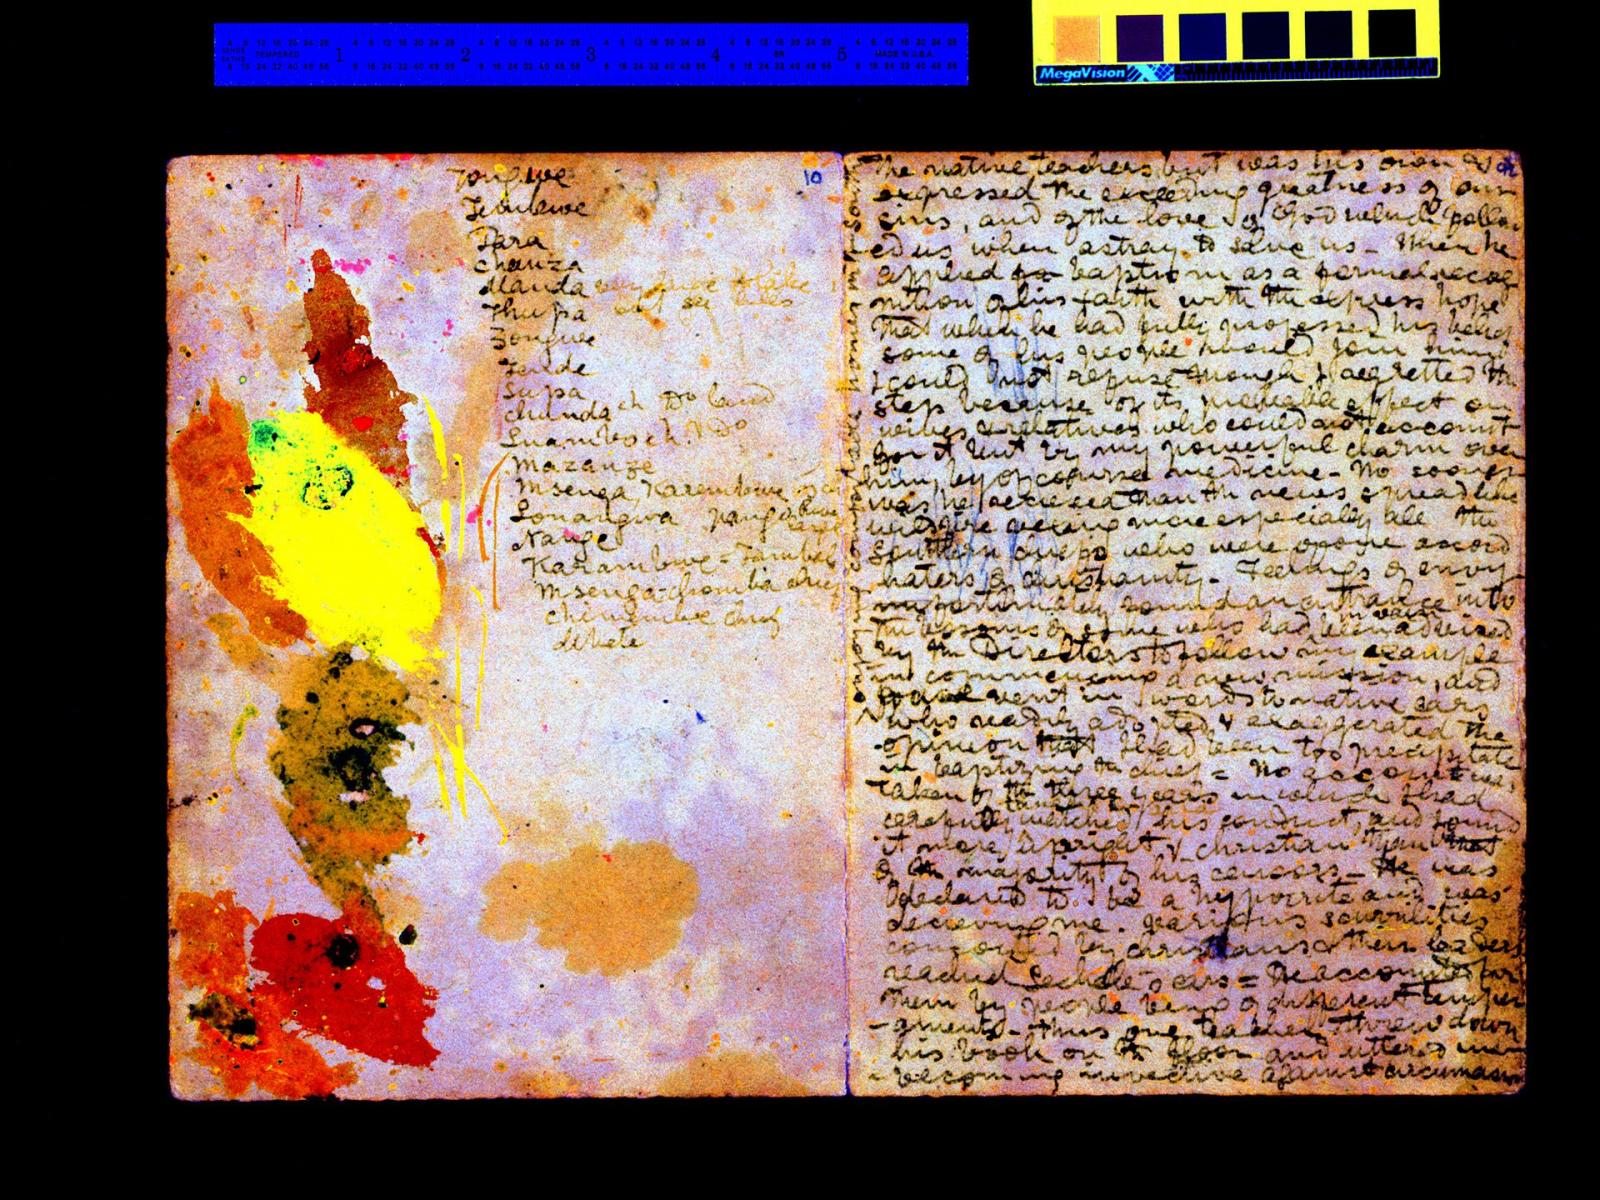 Spectral image of Livingstone's Diary